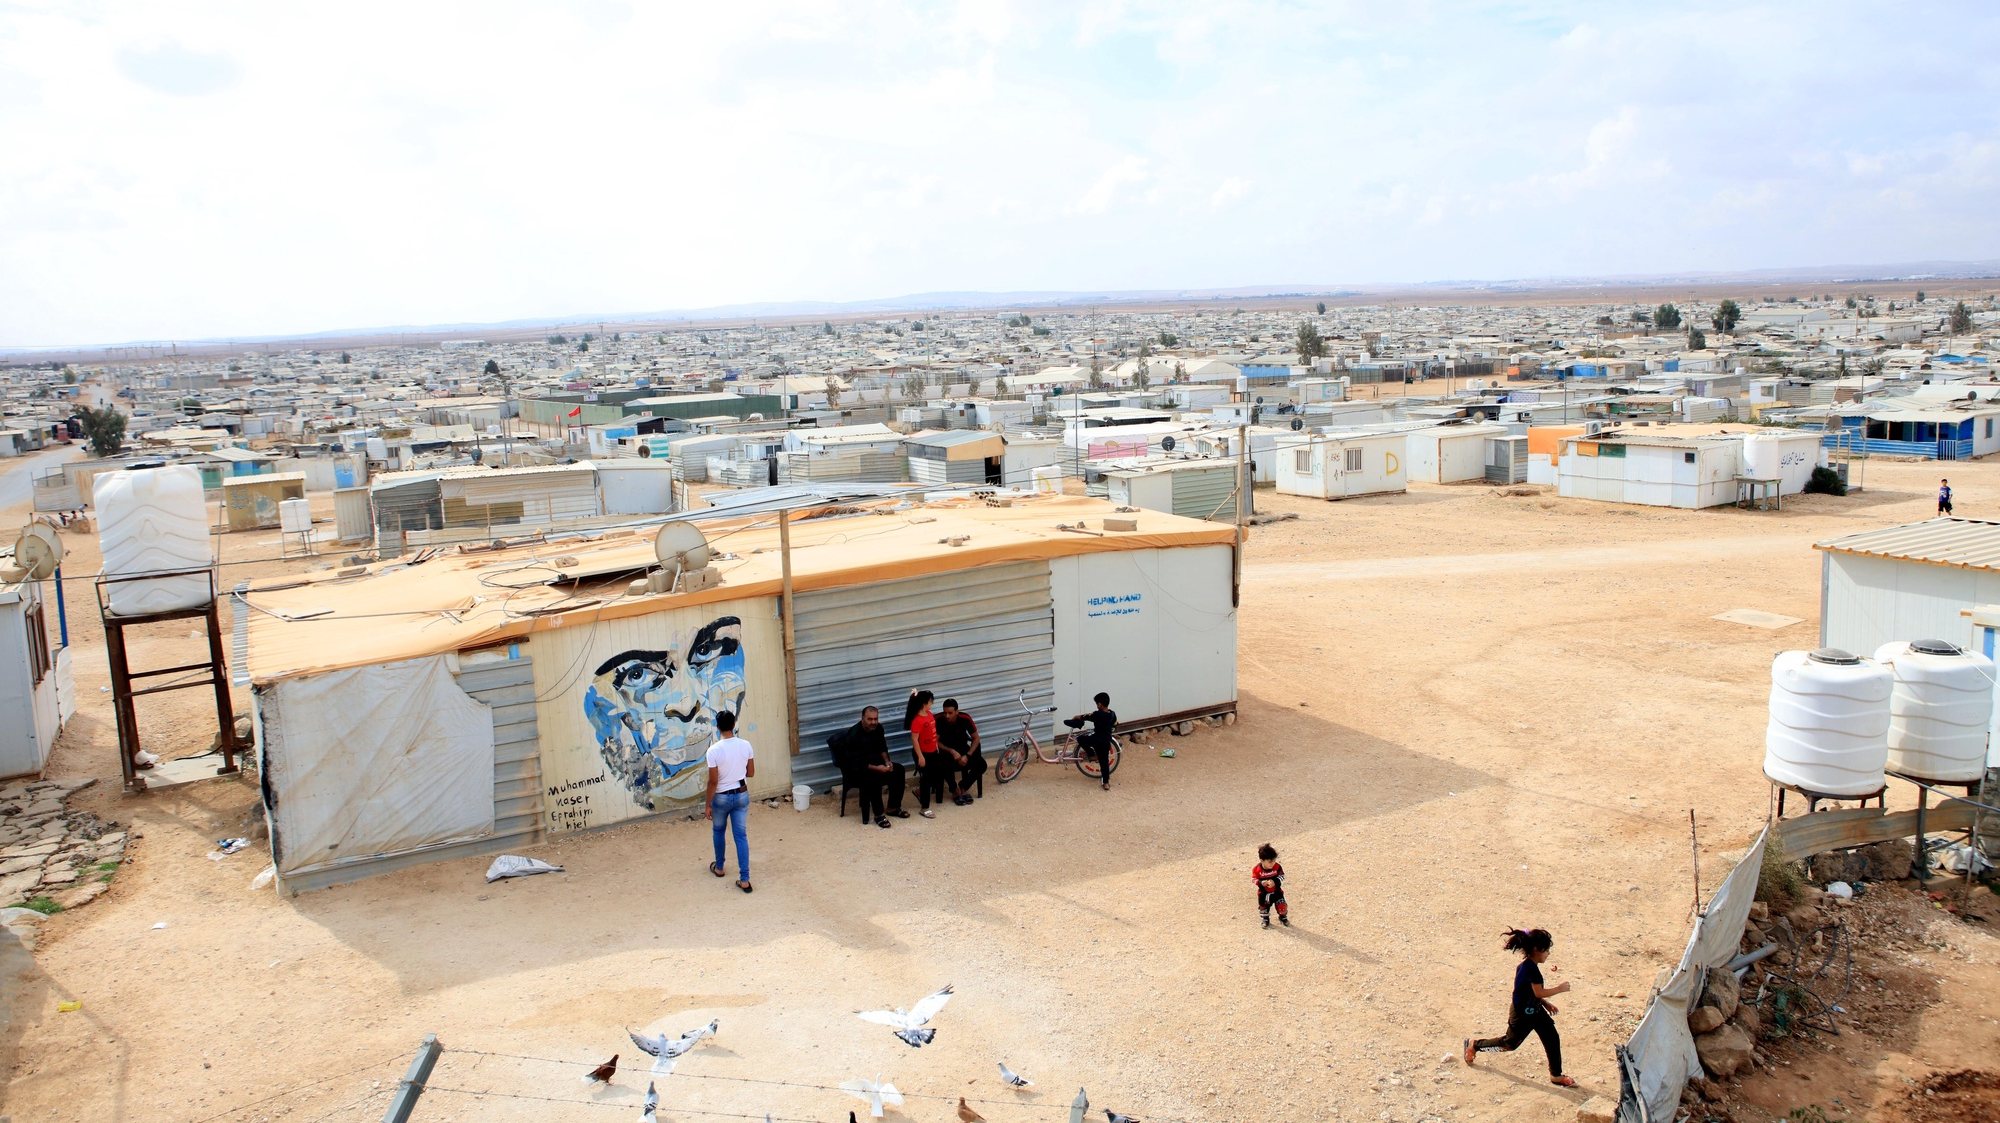 epa09592057 A general view of the Zaatari refugee camp, Jordan, 19 November 2021. According to latest UNHCR data, the Zaatari camp, the largest of two camps in Jordan, is currently hosting 79,978 registered Syrian refugees.  EPA/MOHAMMAD ALI